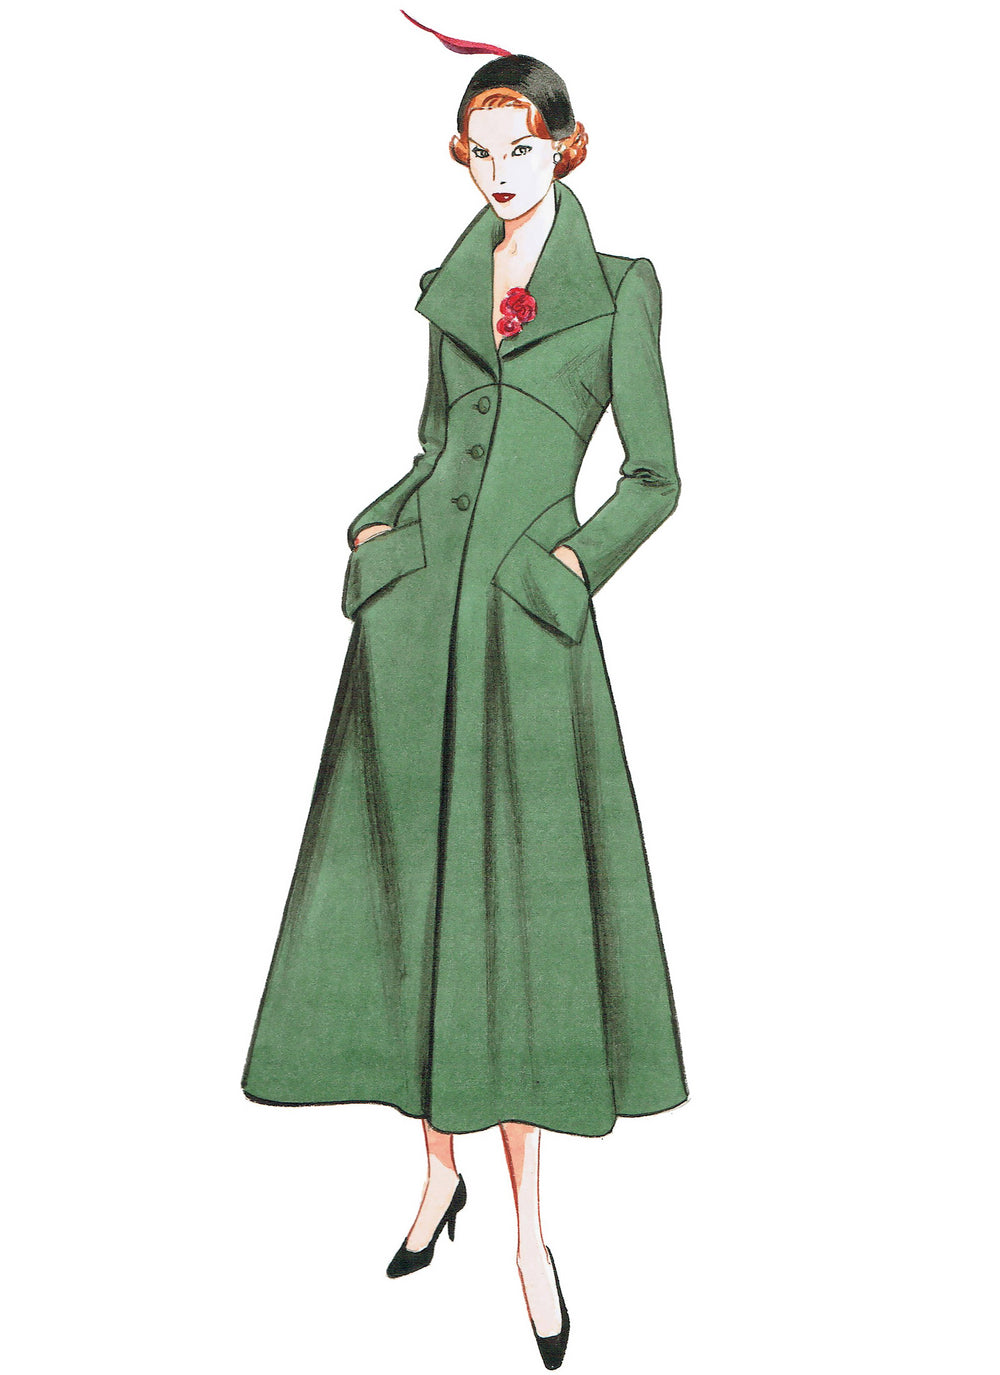 Vogue Sewing Pattern 1669 1940's coat | Vintage Vogue from Jaycotts Sewing Supplies